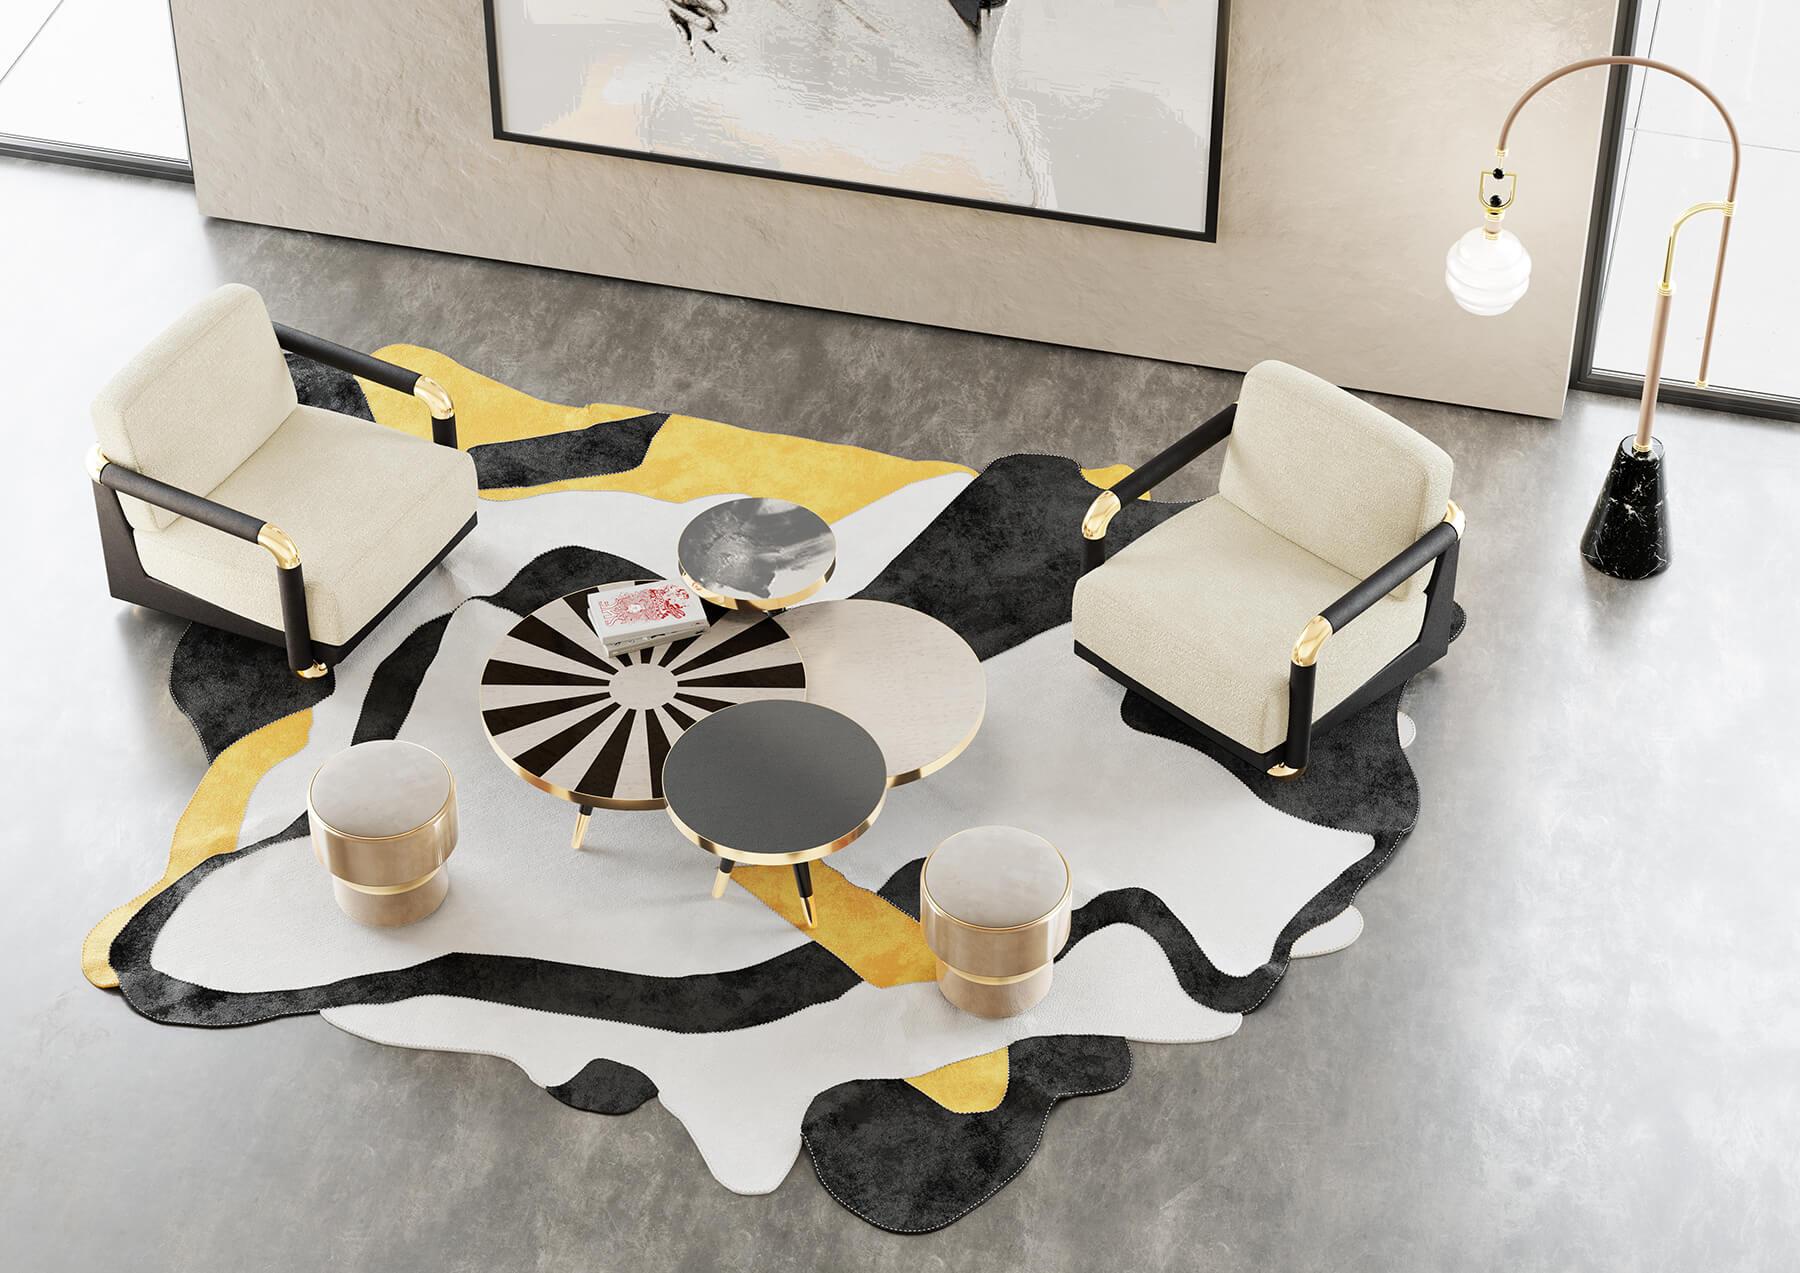 Contemporary 21st Century Modern Abstract Design Rug Hand-Tufted Wool Orange, Black & Beige For Sale